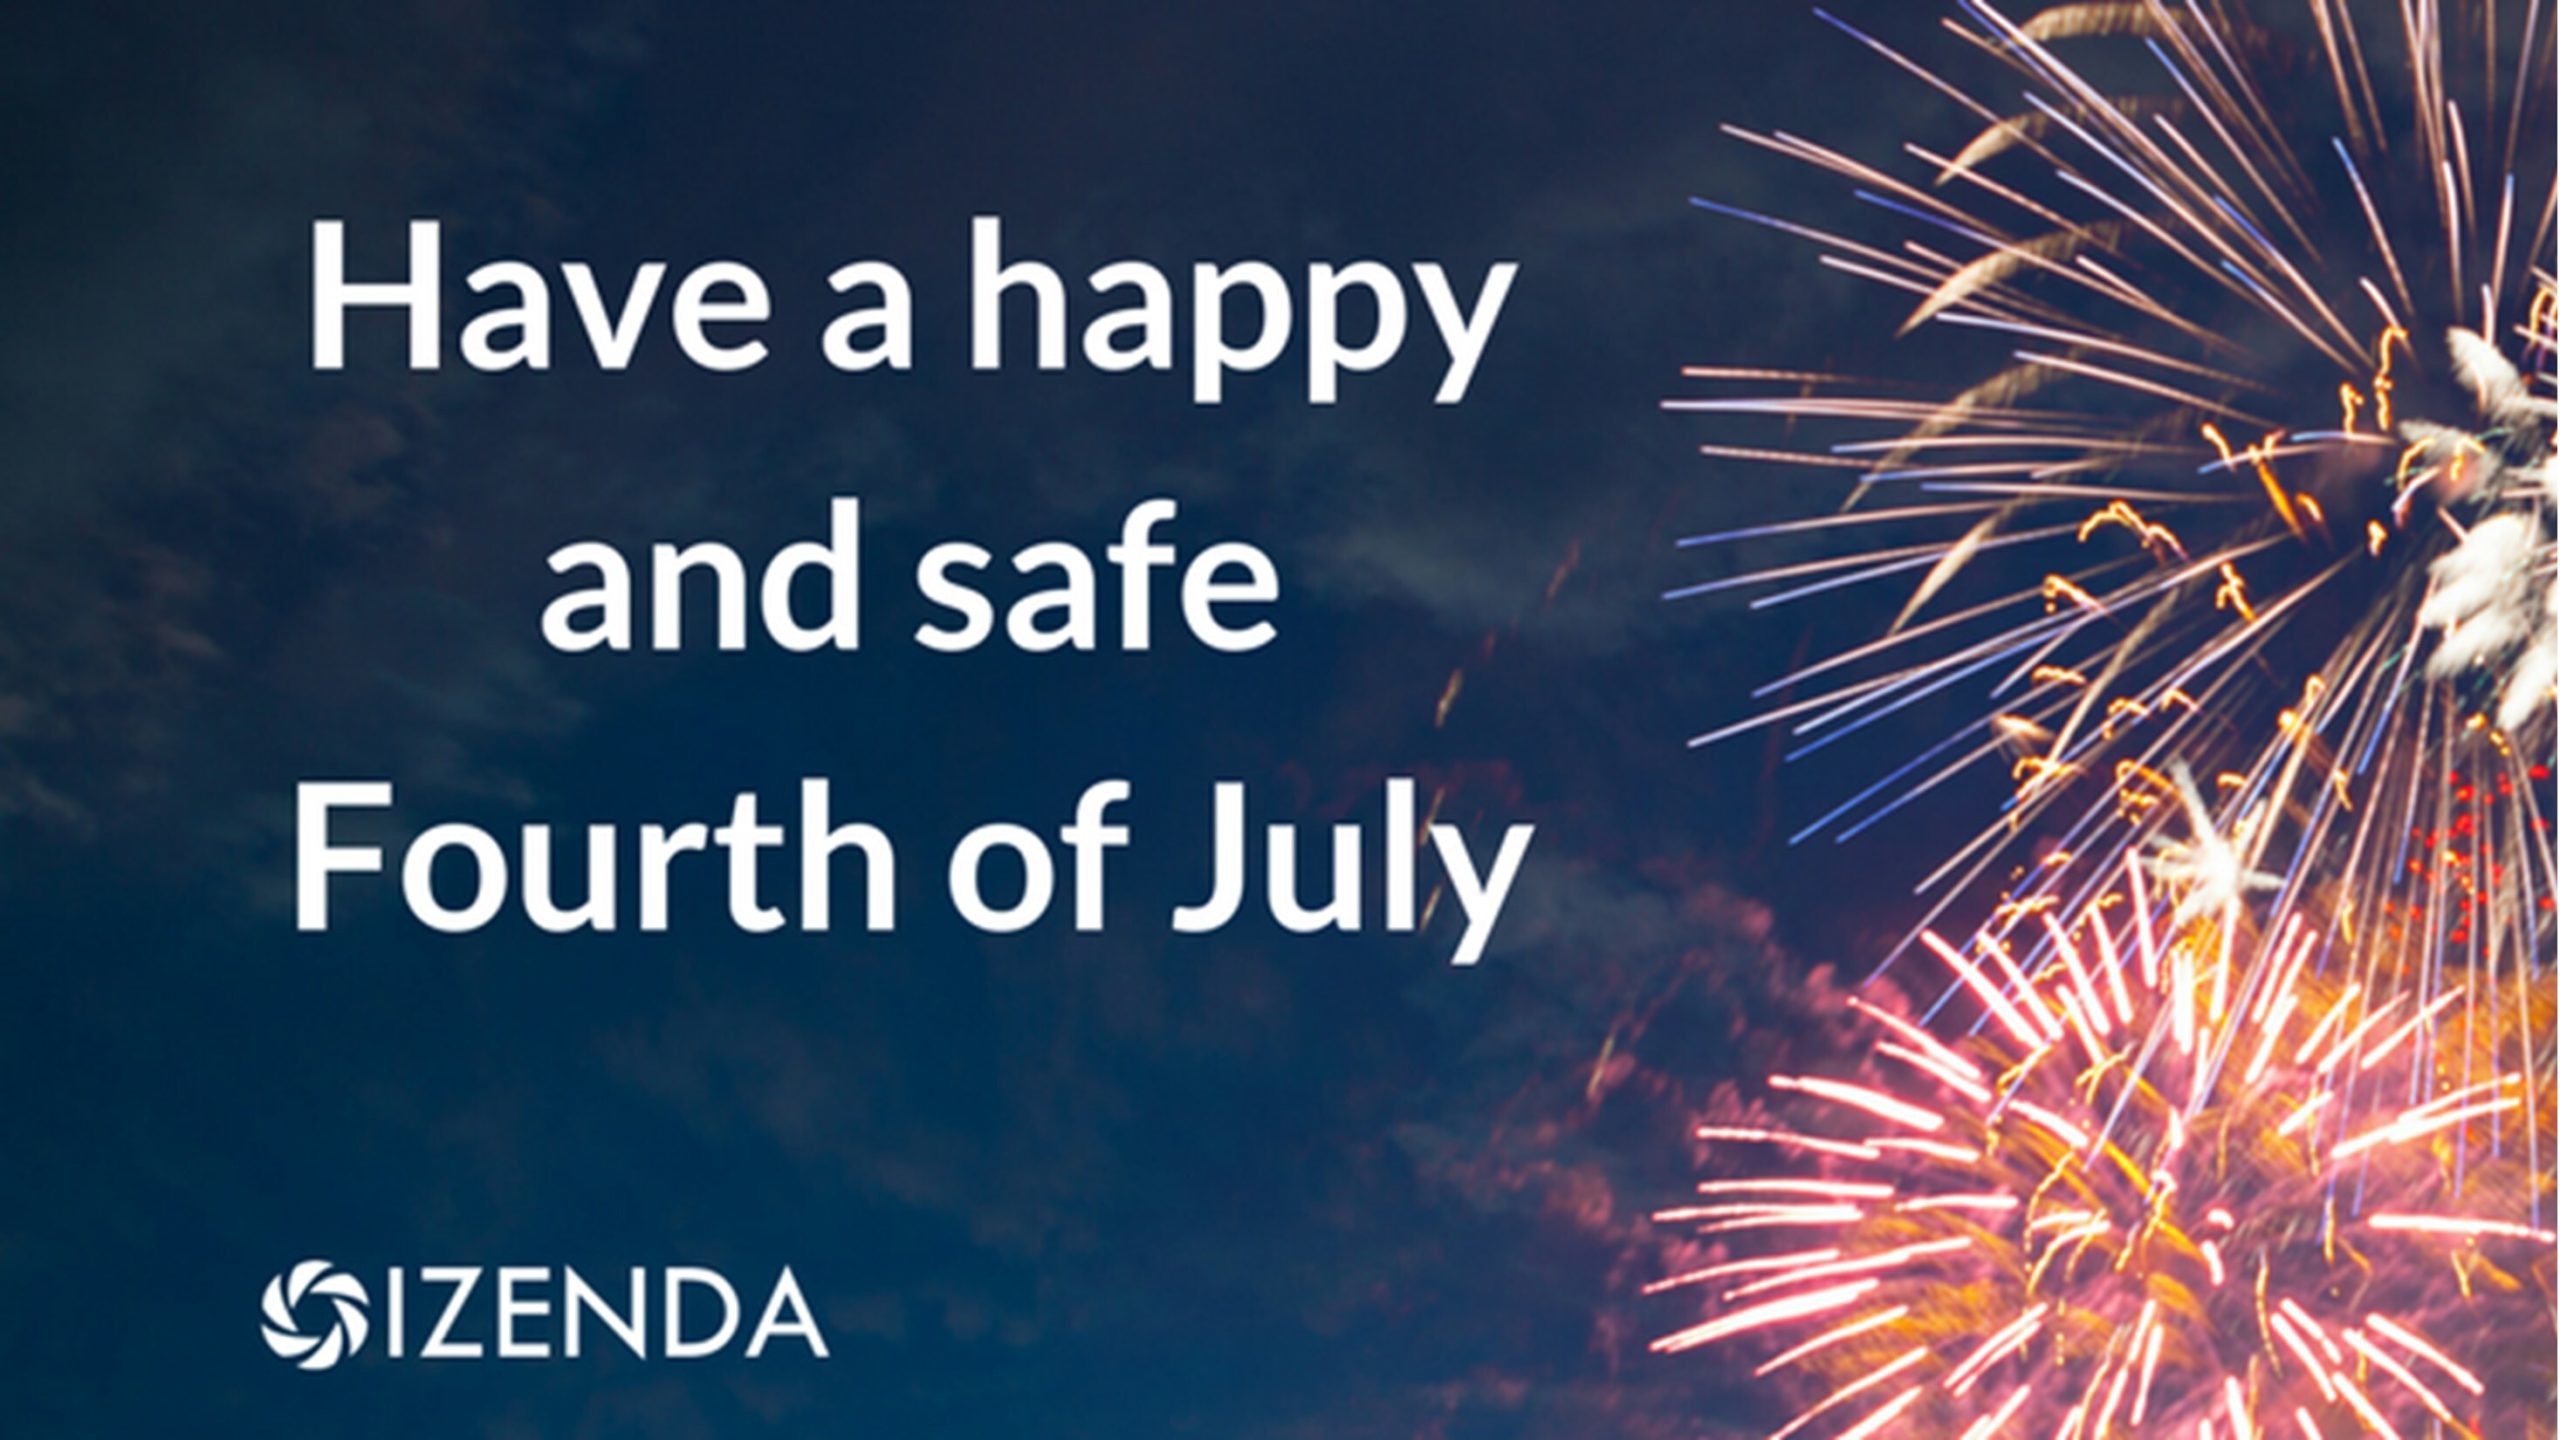 fireworks cause thousands of injuries every year. please be safe and have a happy fourth of july